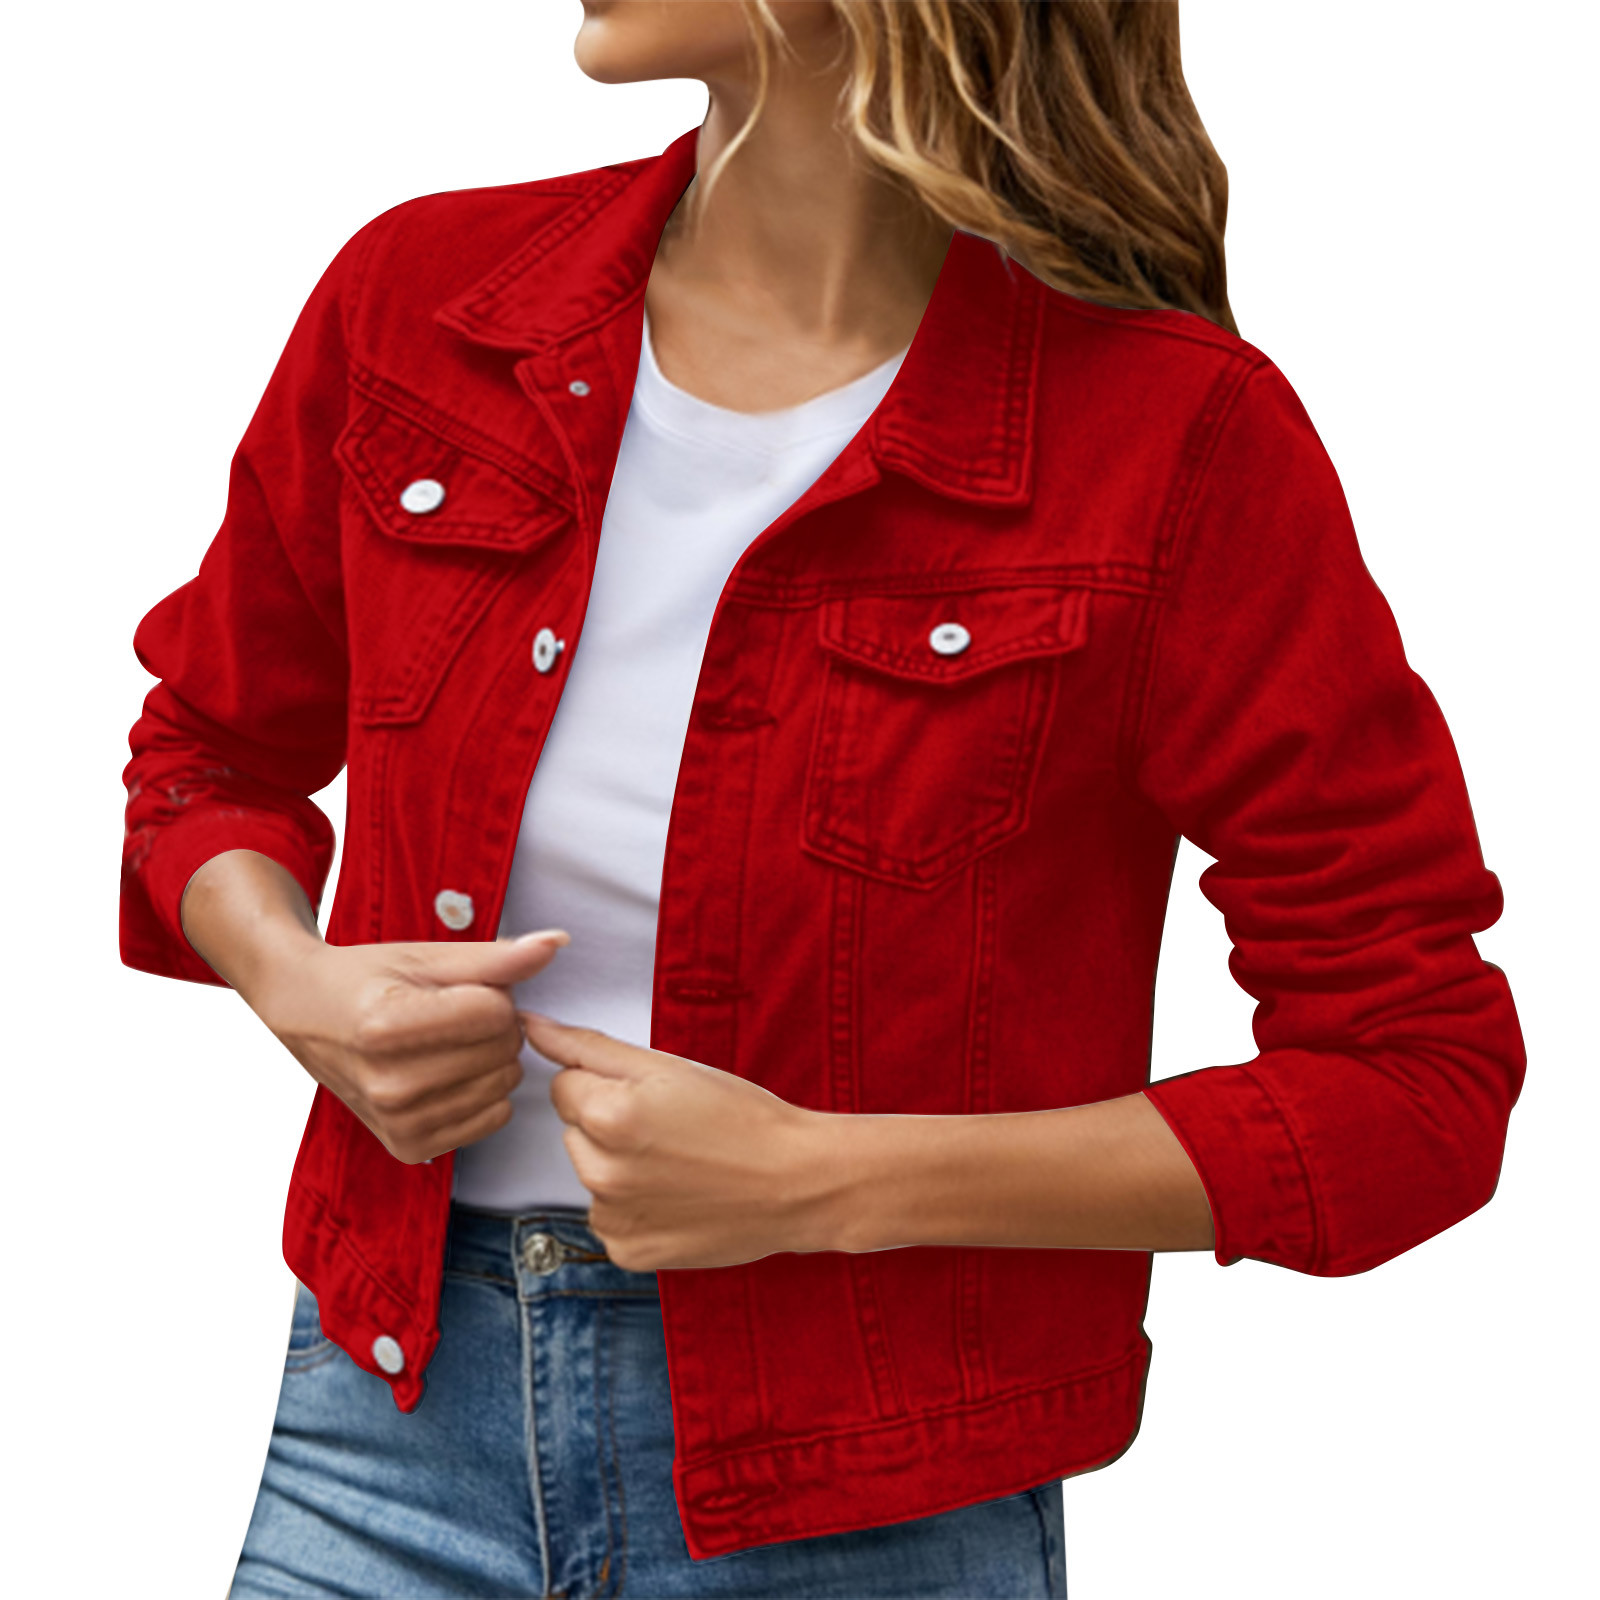 iOPQO womens sweaters Women's Basic Solid Color Button Down Denim Cotton Jacket With Pockets Denim Jacket Coat Women's Denim Jackets Red L - image 3 of 8